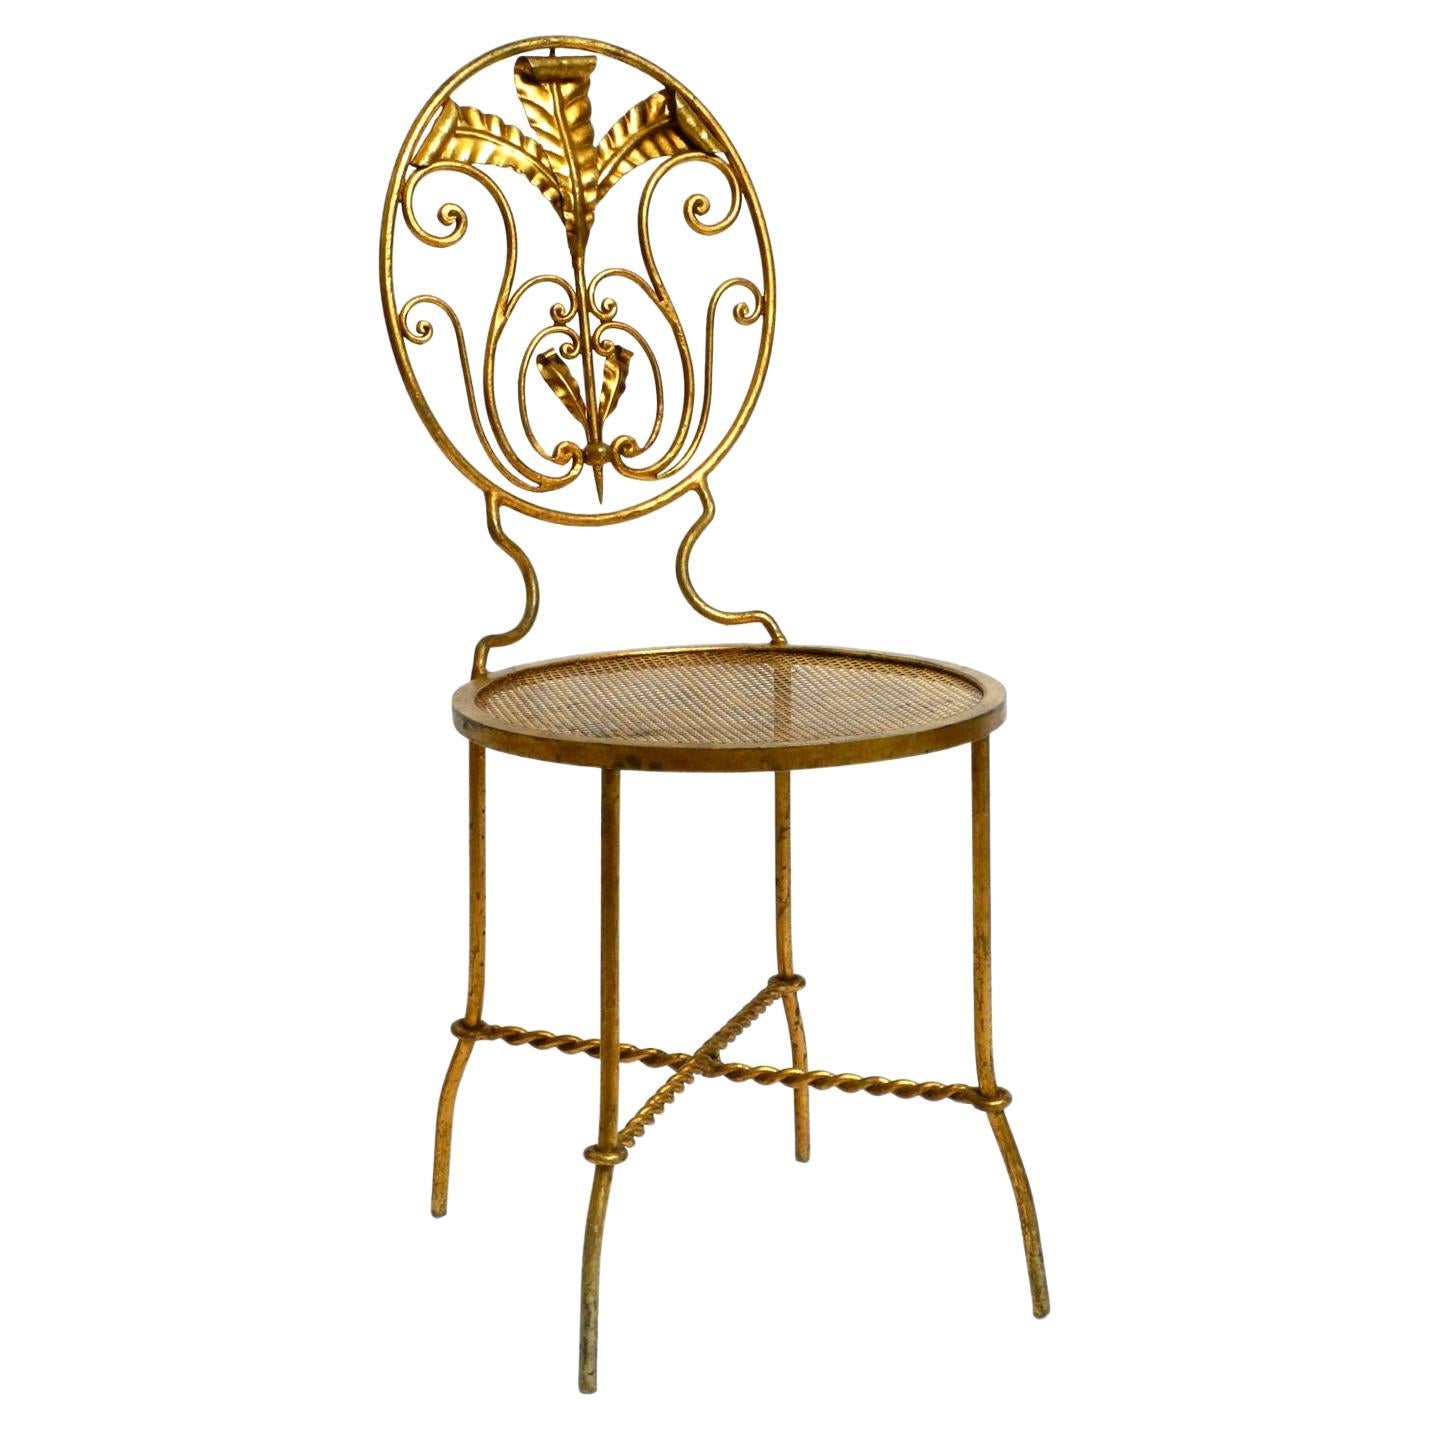 Beautiful Italian 70's Regency Design Gold Plated Wrought Iron Chair For Sale